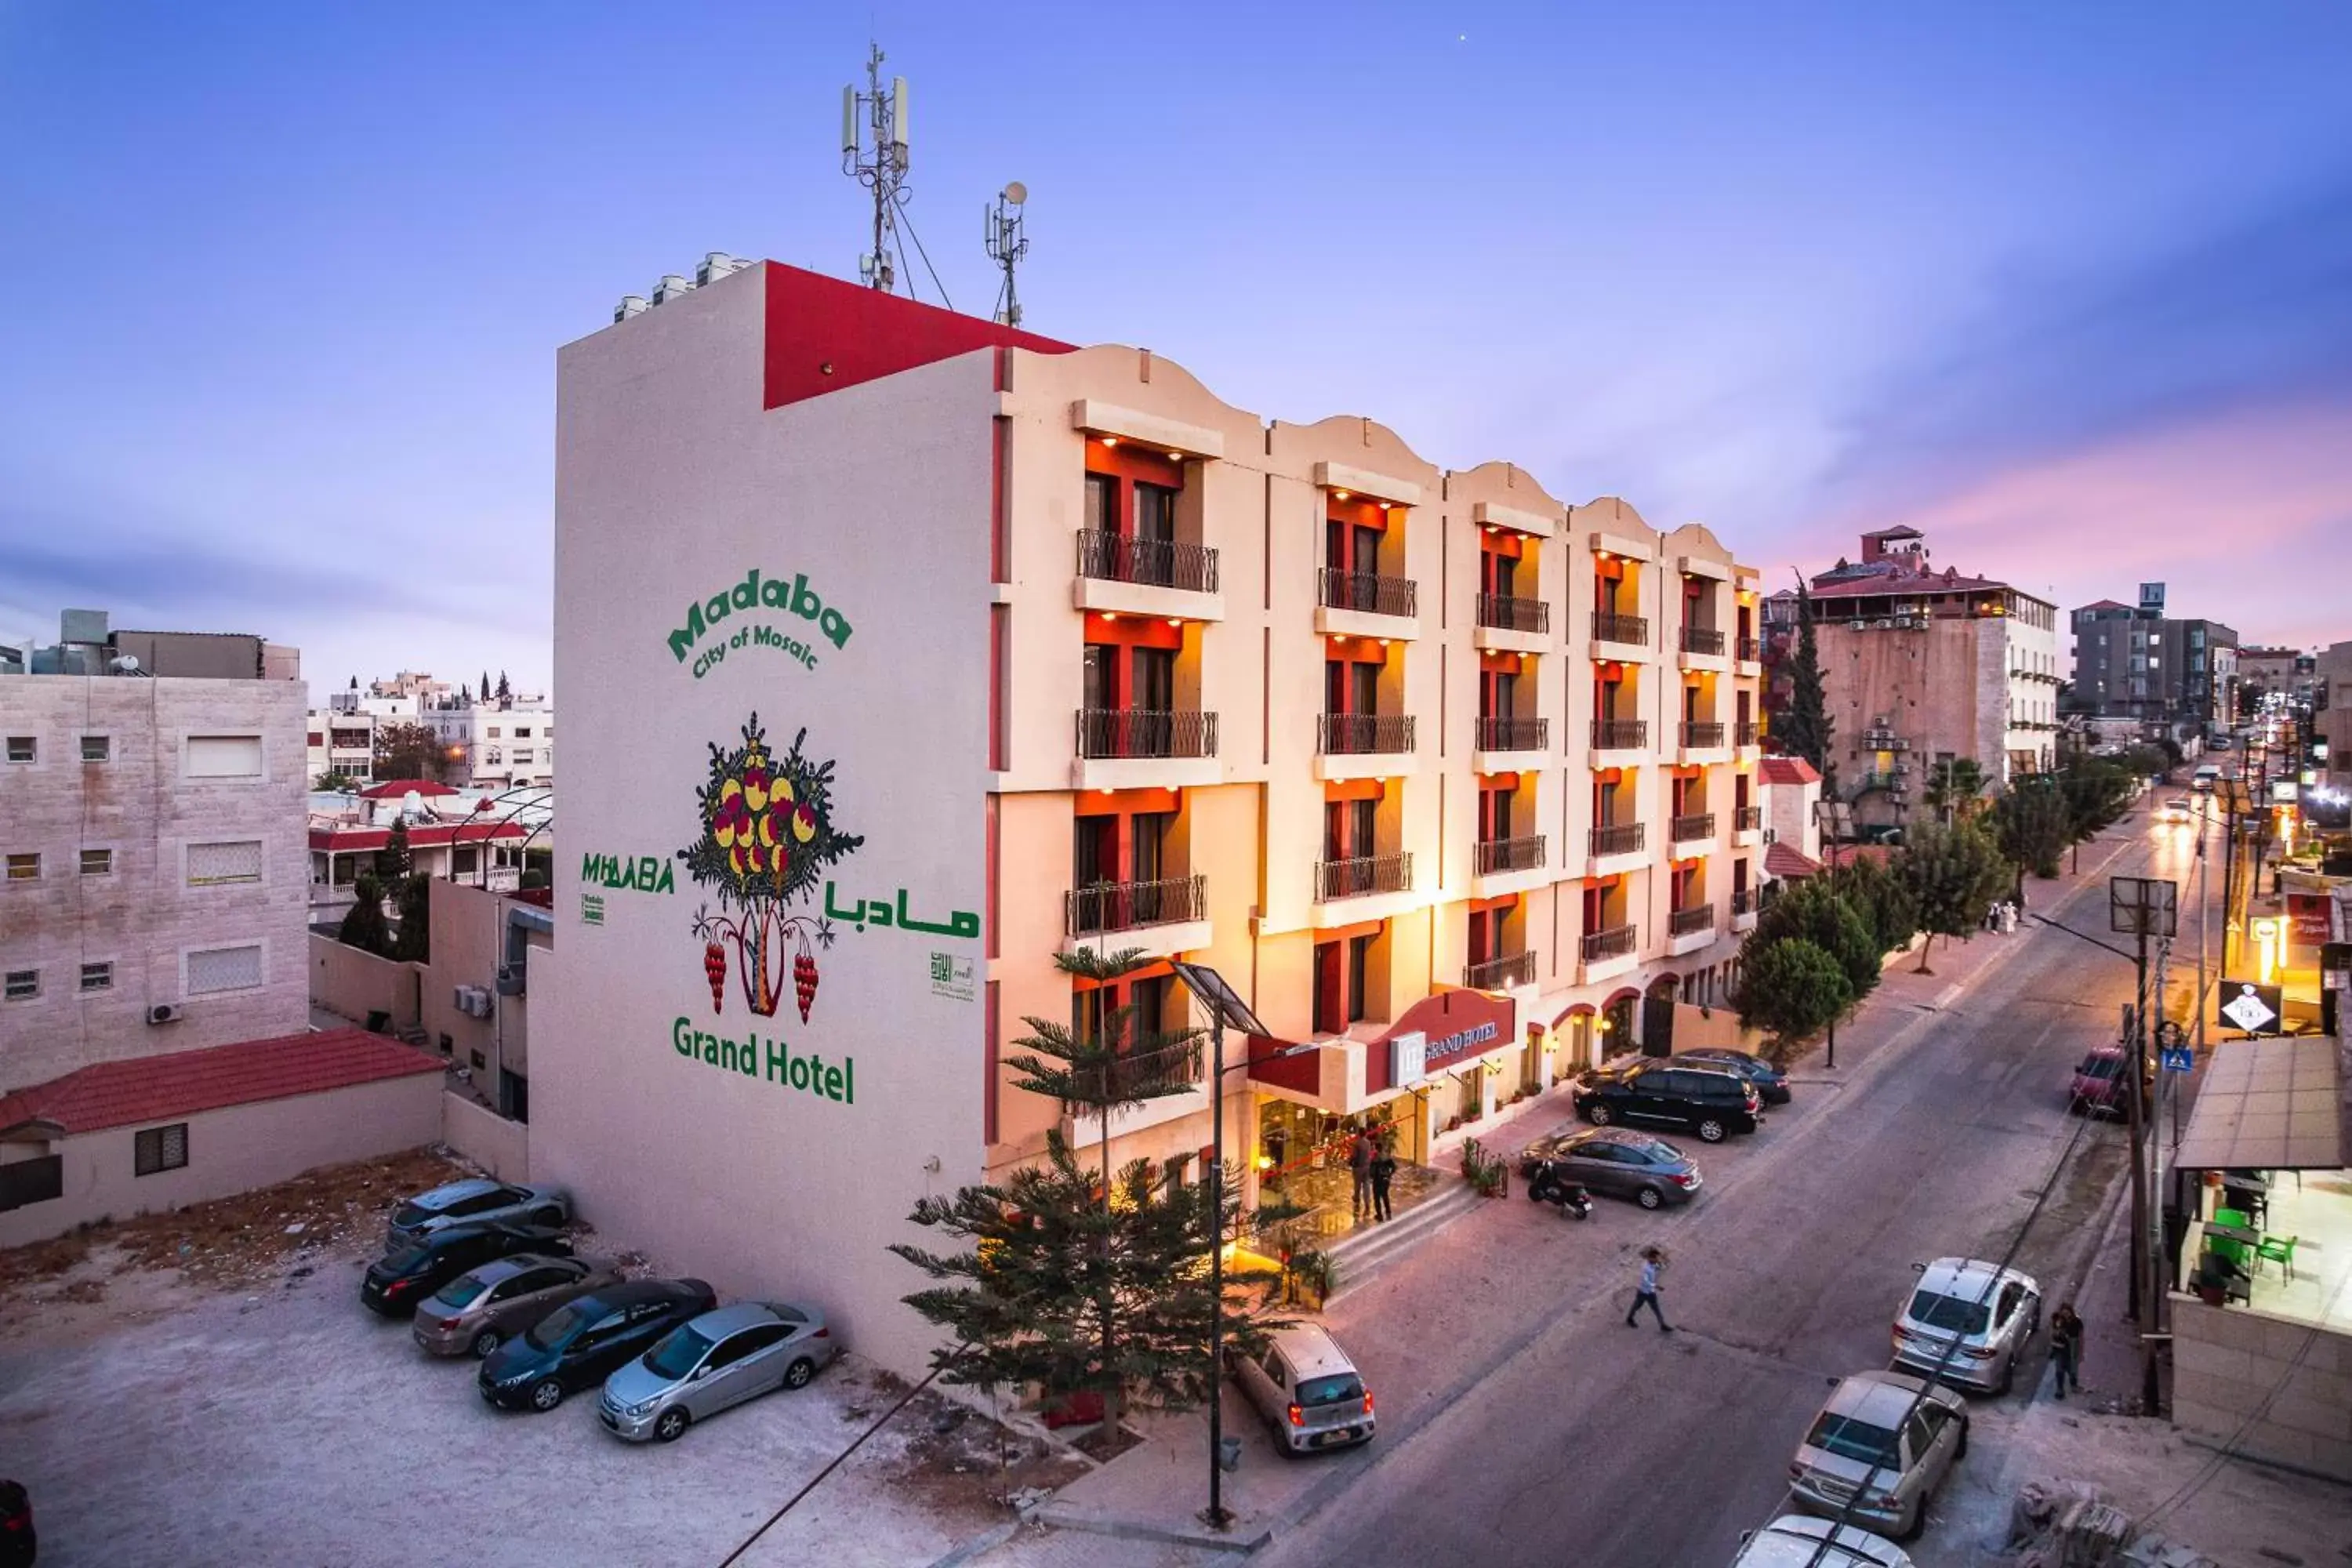 Property building in Grand Hotel Madaba